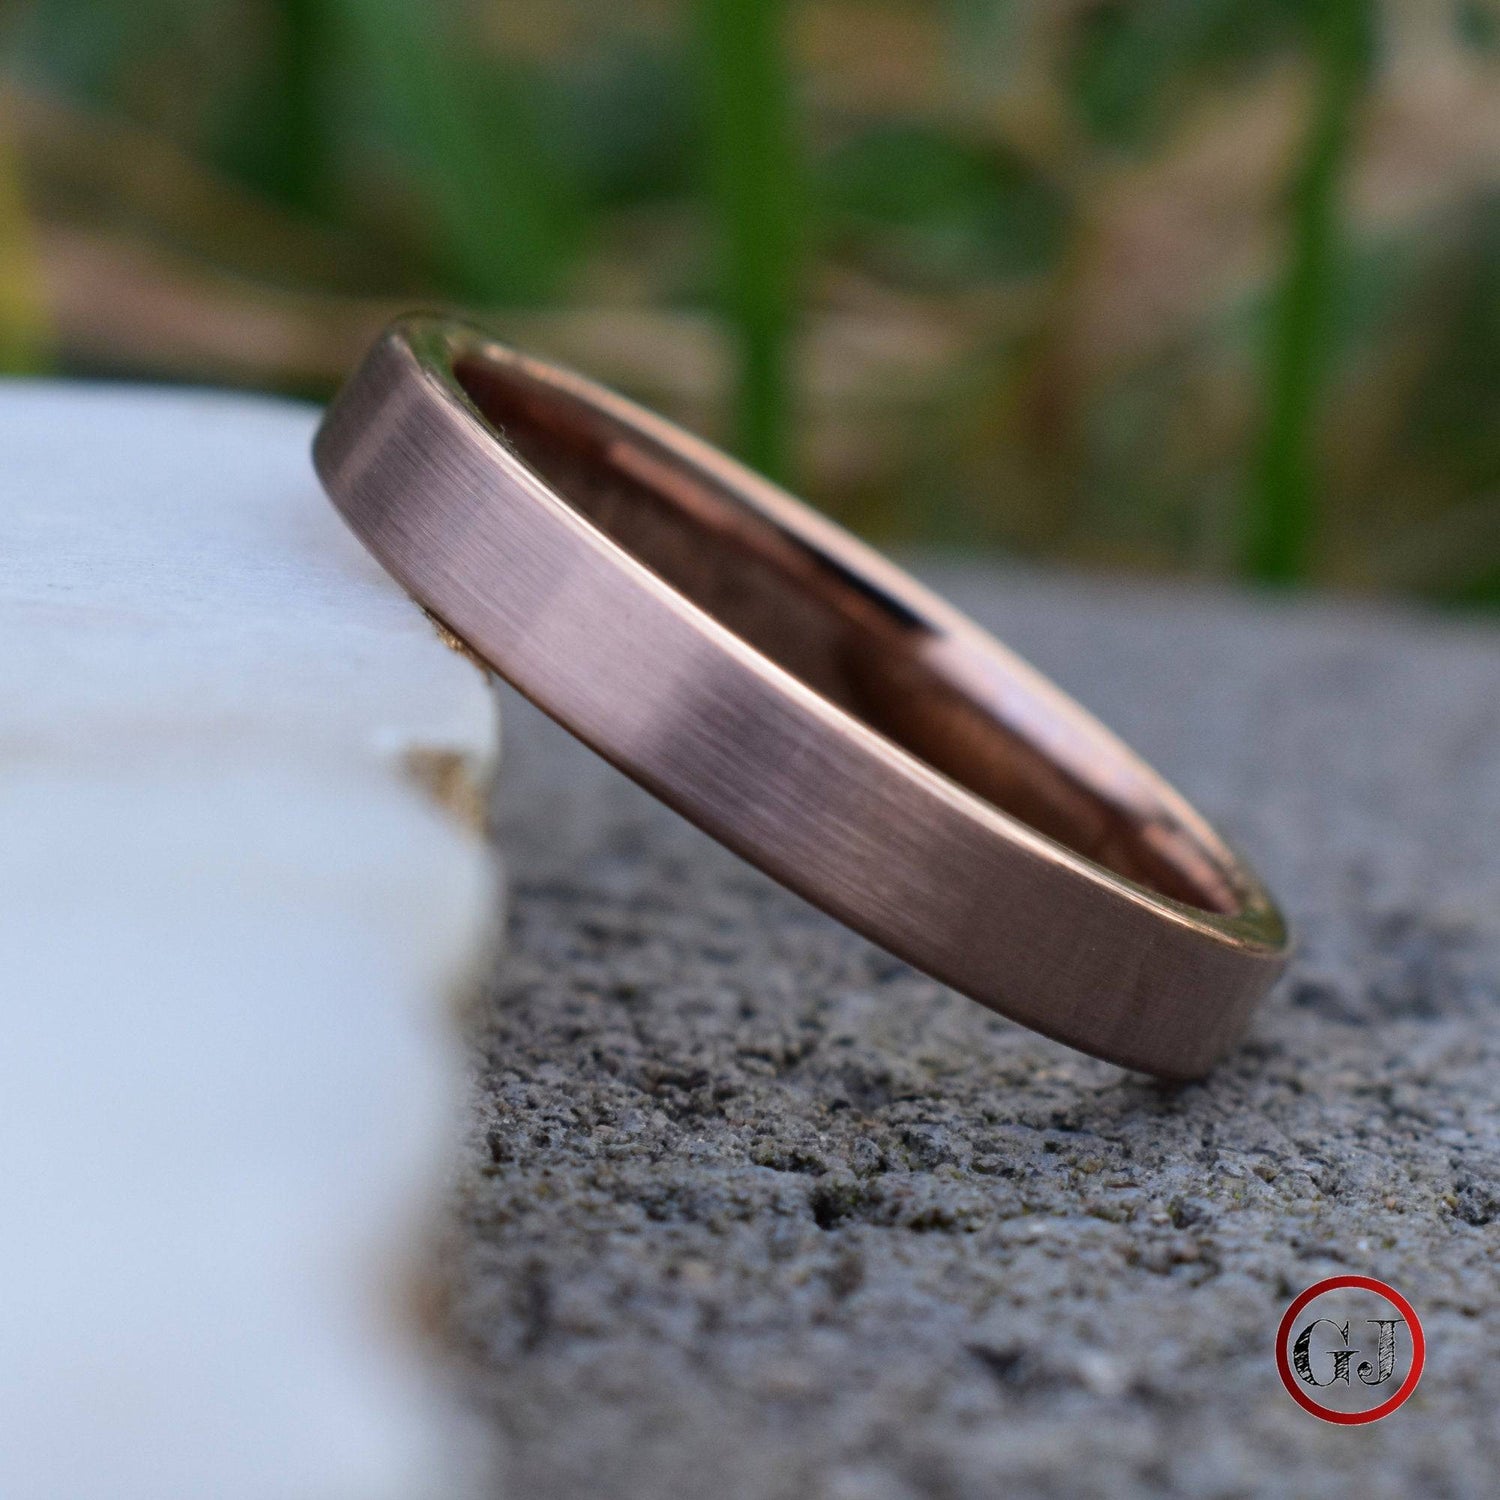 14K Solid Rose Gold 4mm Comfort Fit Men's and Women's Wedding Band Ring